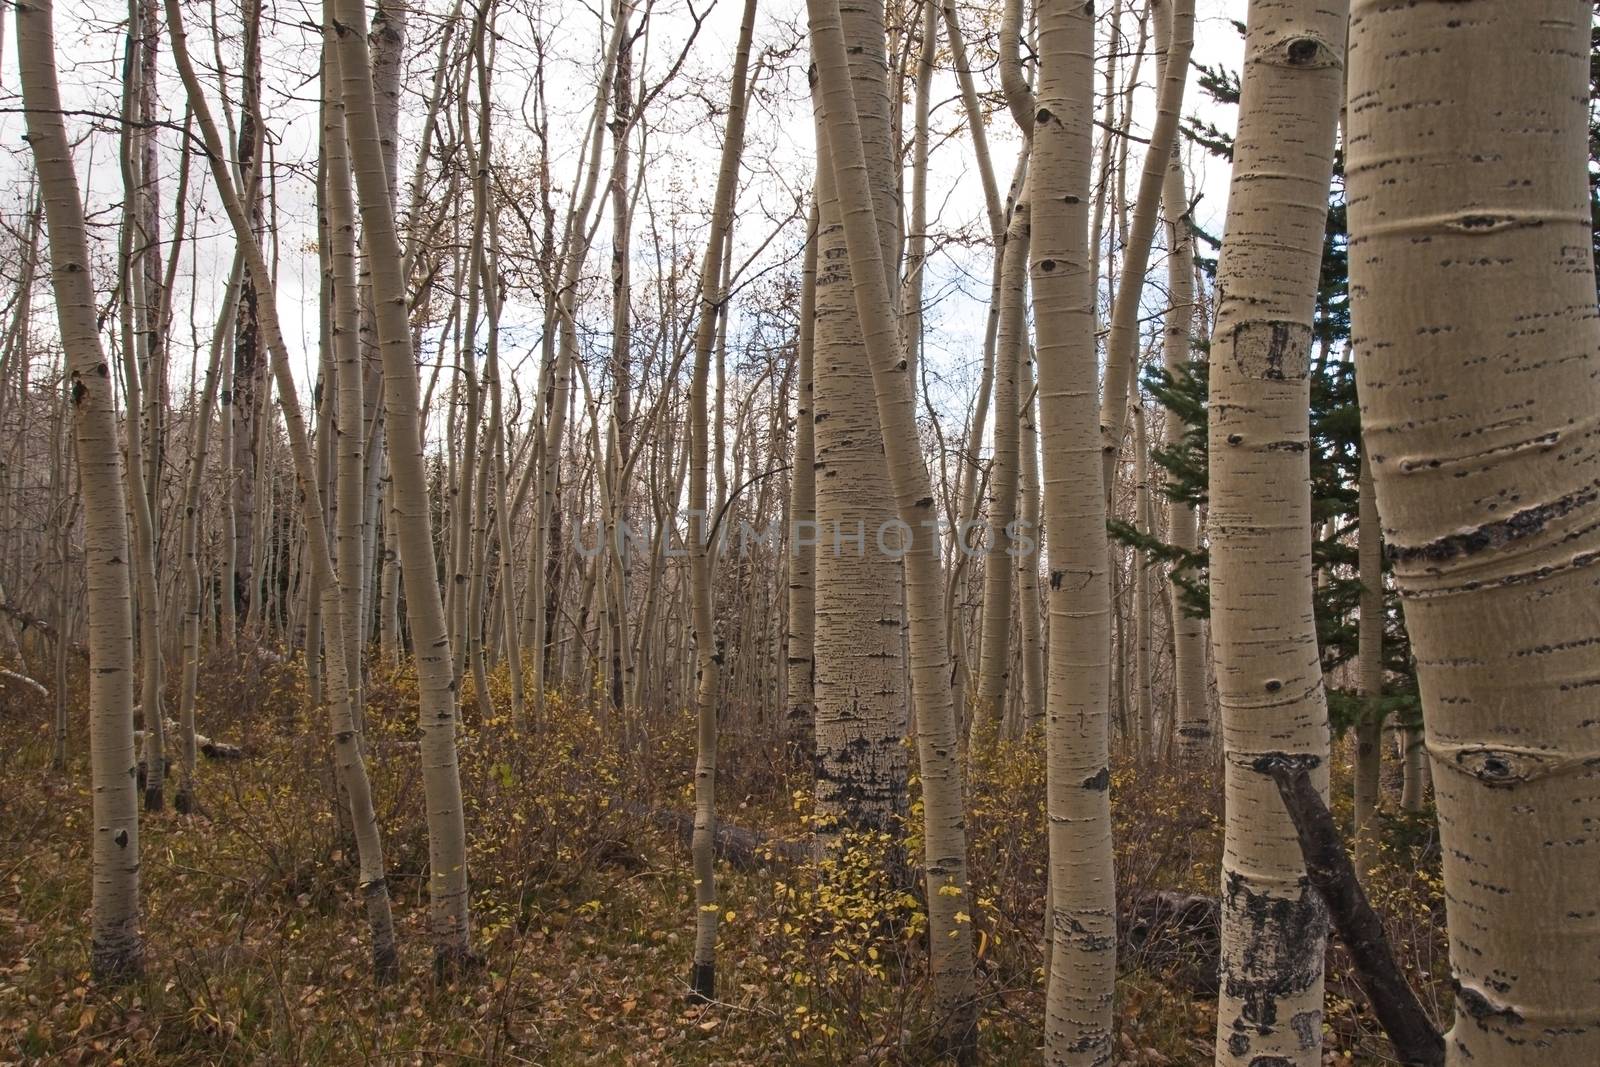 Quacking Aspen (Populus tremuloides) photographed during fall in the Manti-La Sal National Forest. Utah